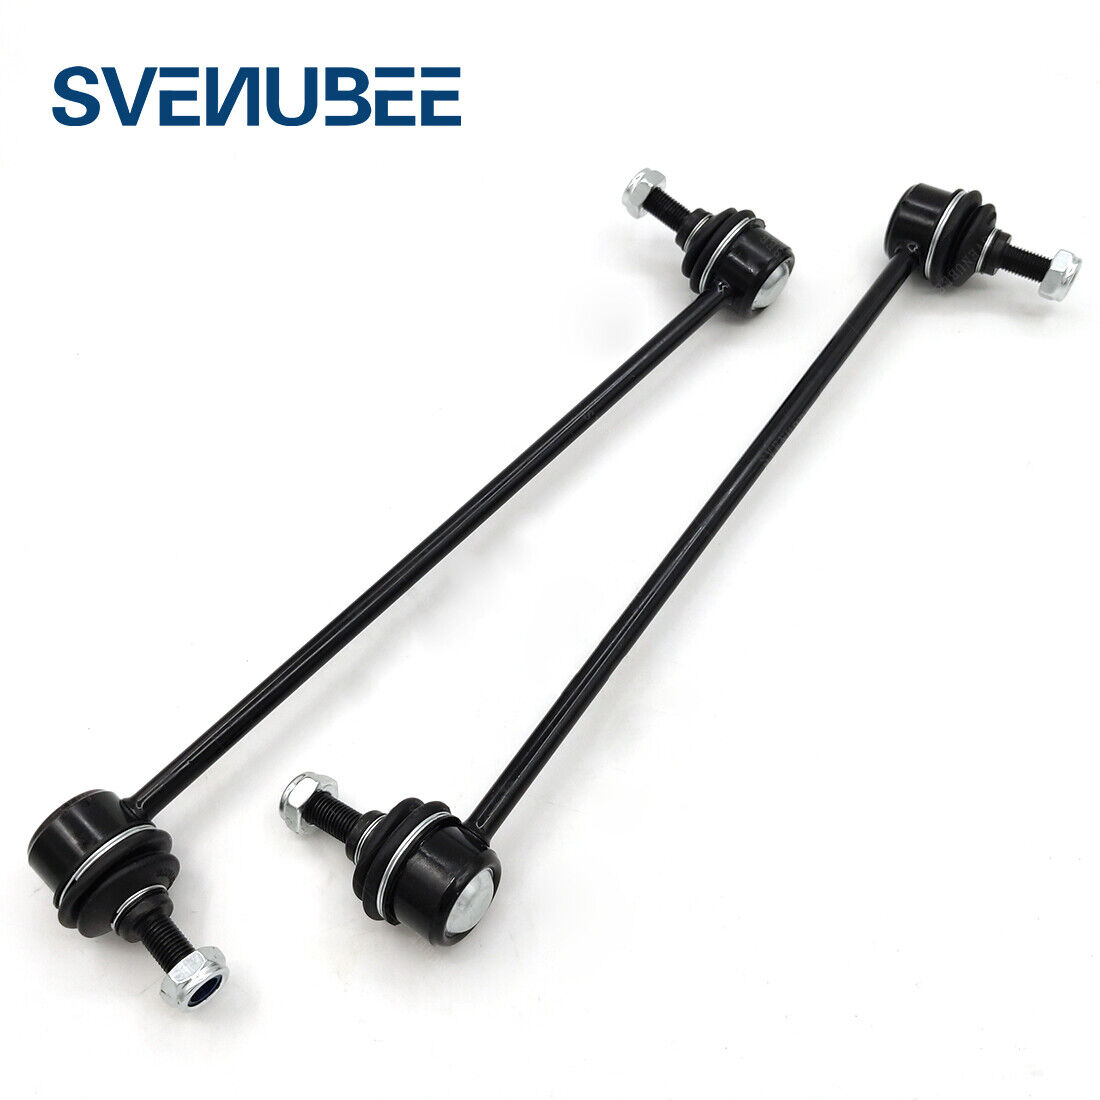 New 2 Front Stabilizer Sway Bar Links Pair For Volvo Ford Escape Focus Mazda 3